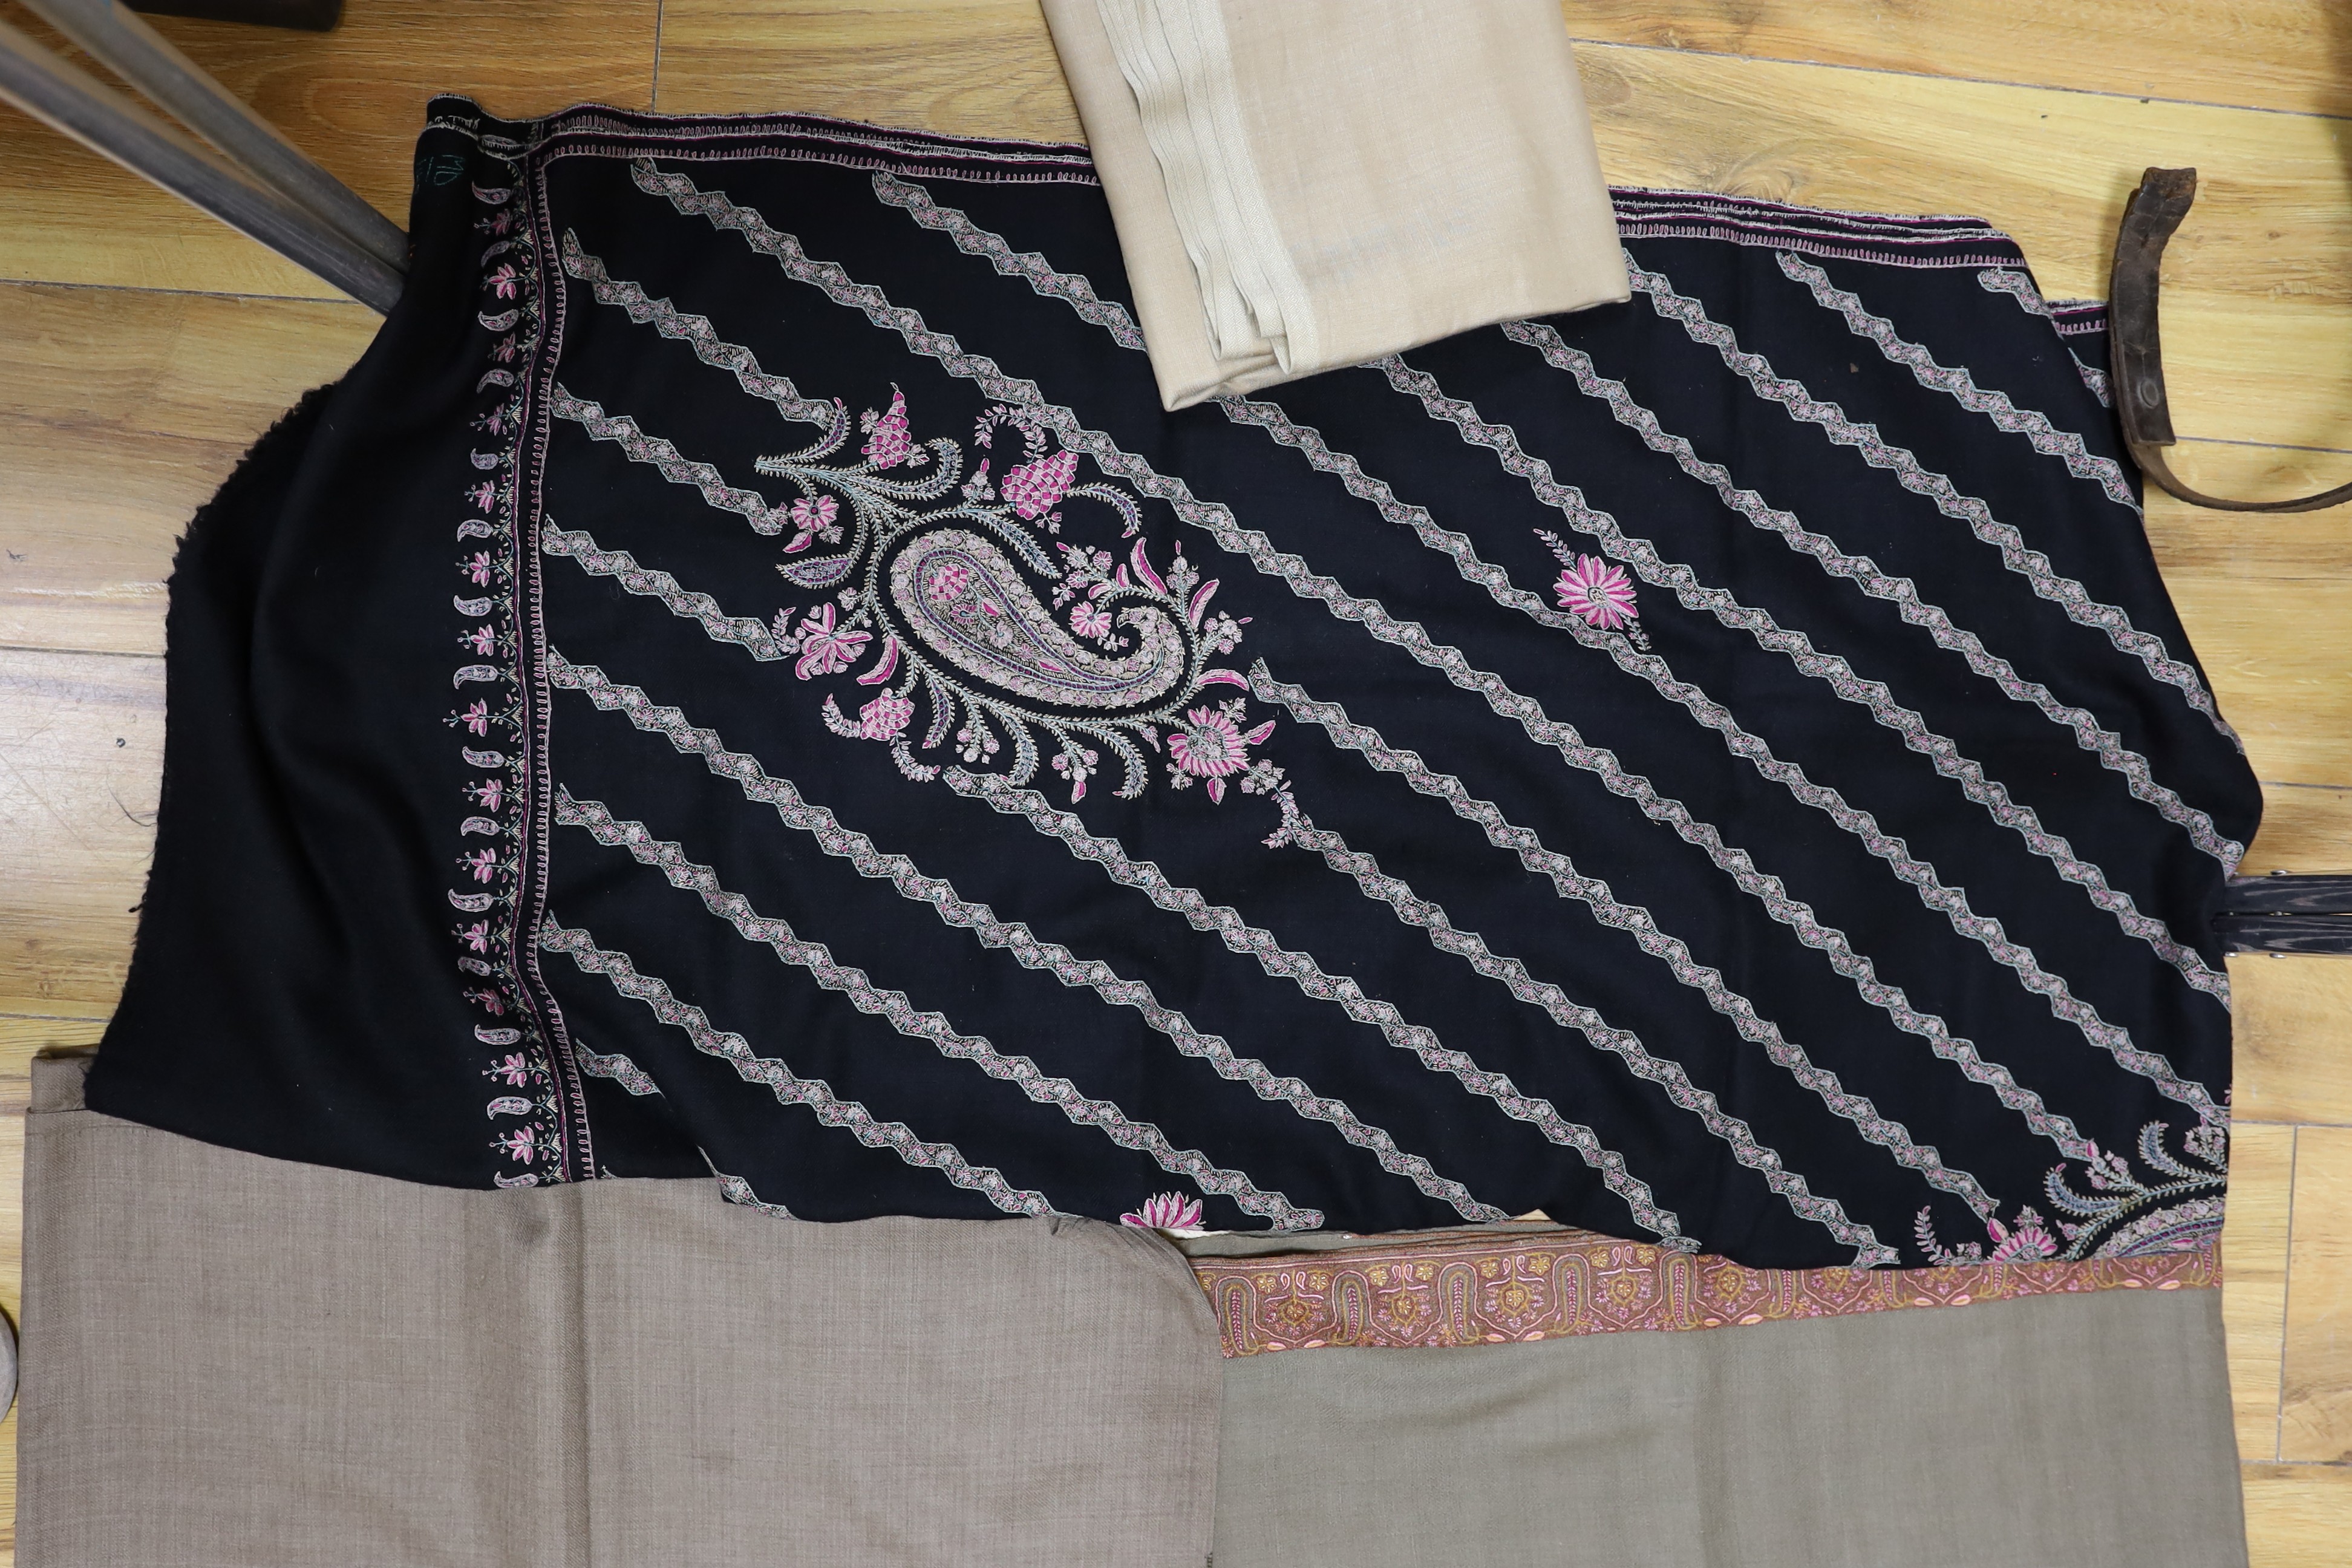 Four Indian wool and cashmere shawls, three silk embroidered